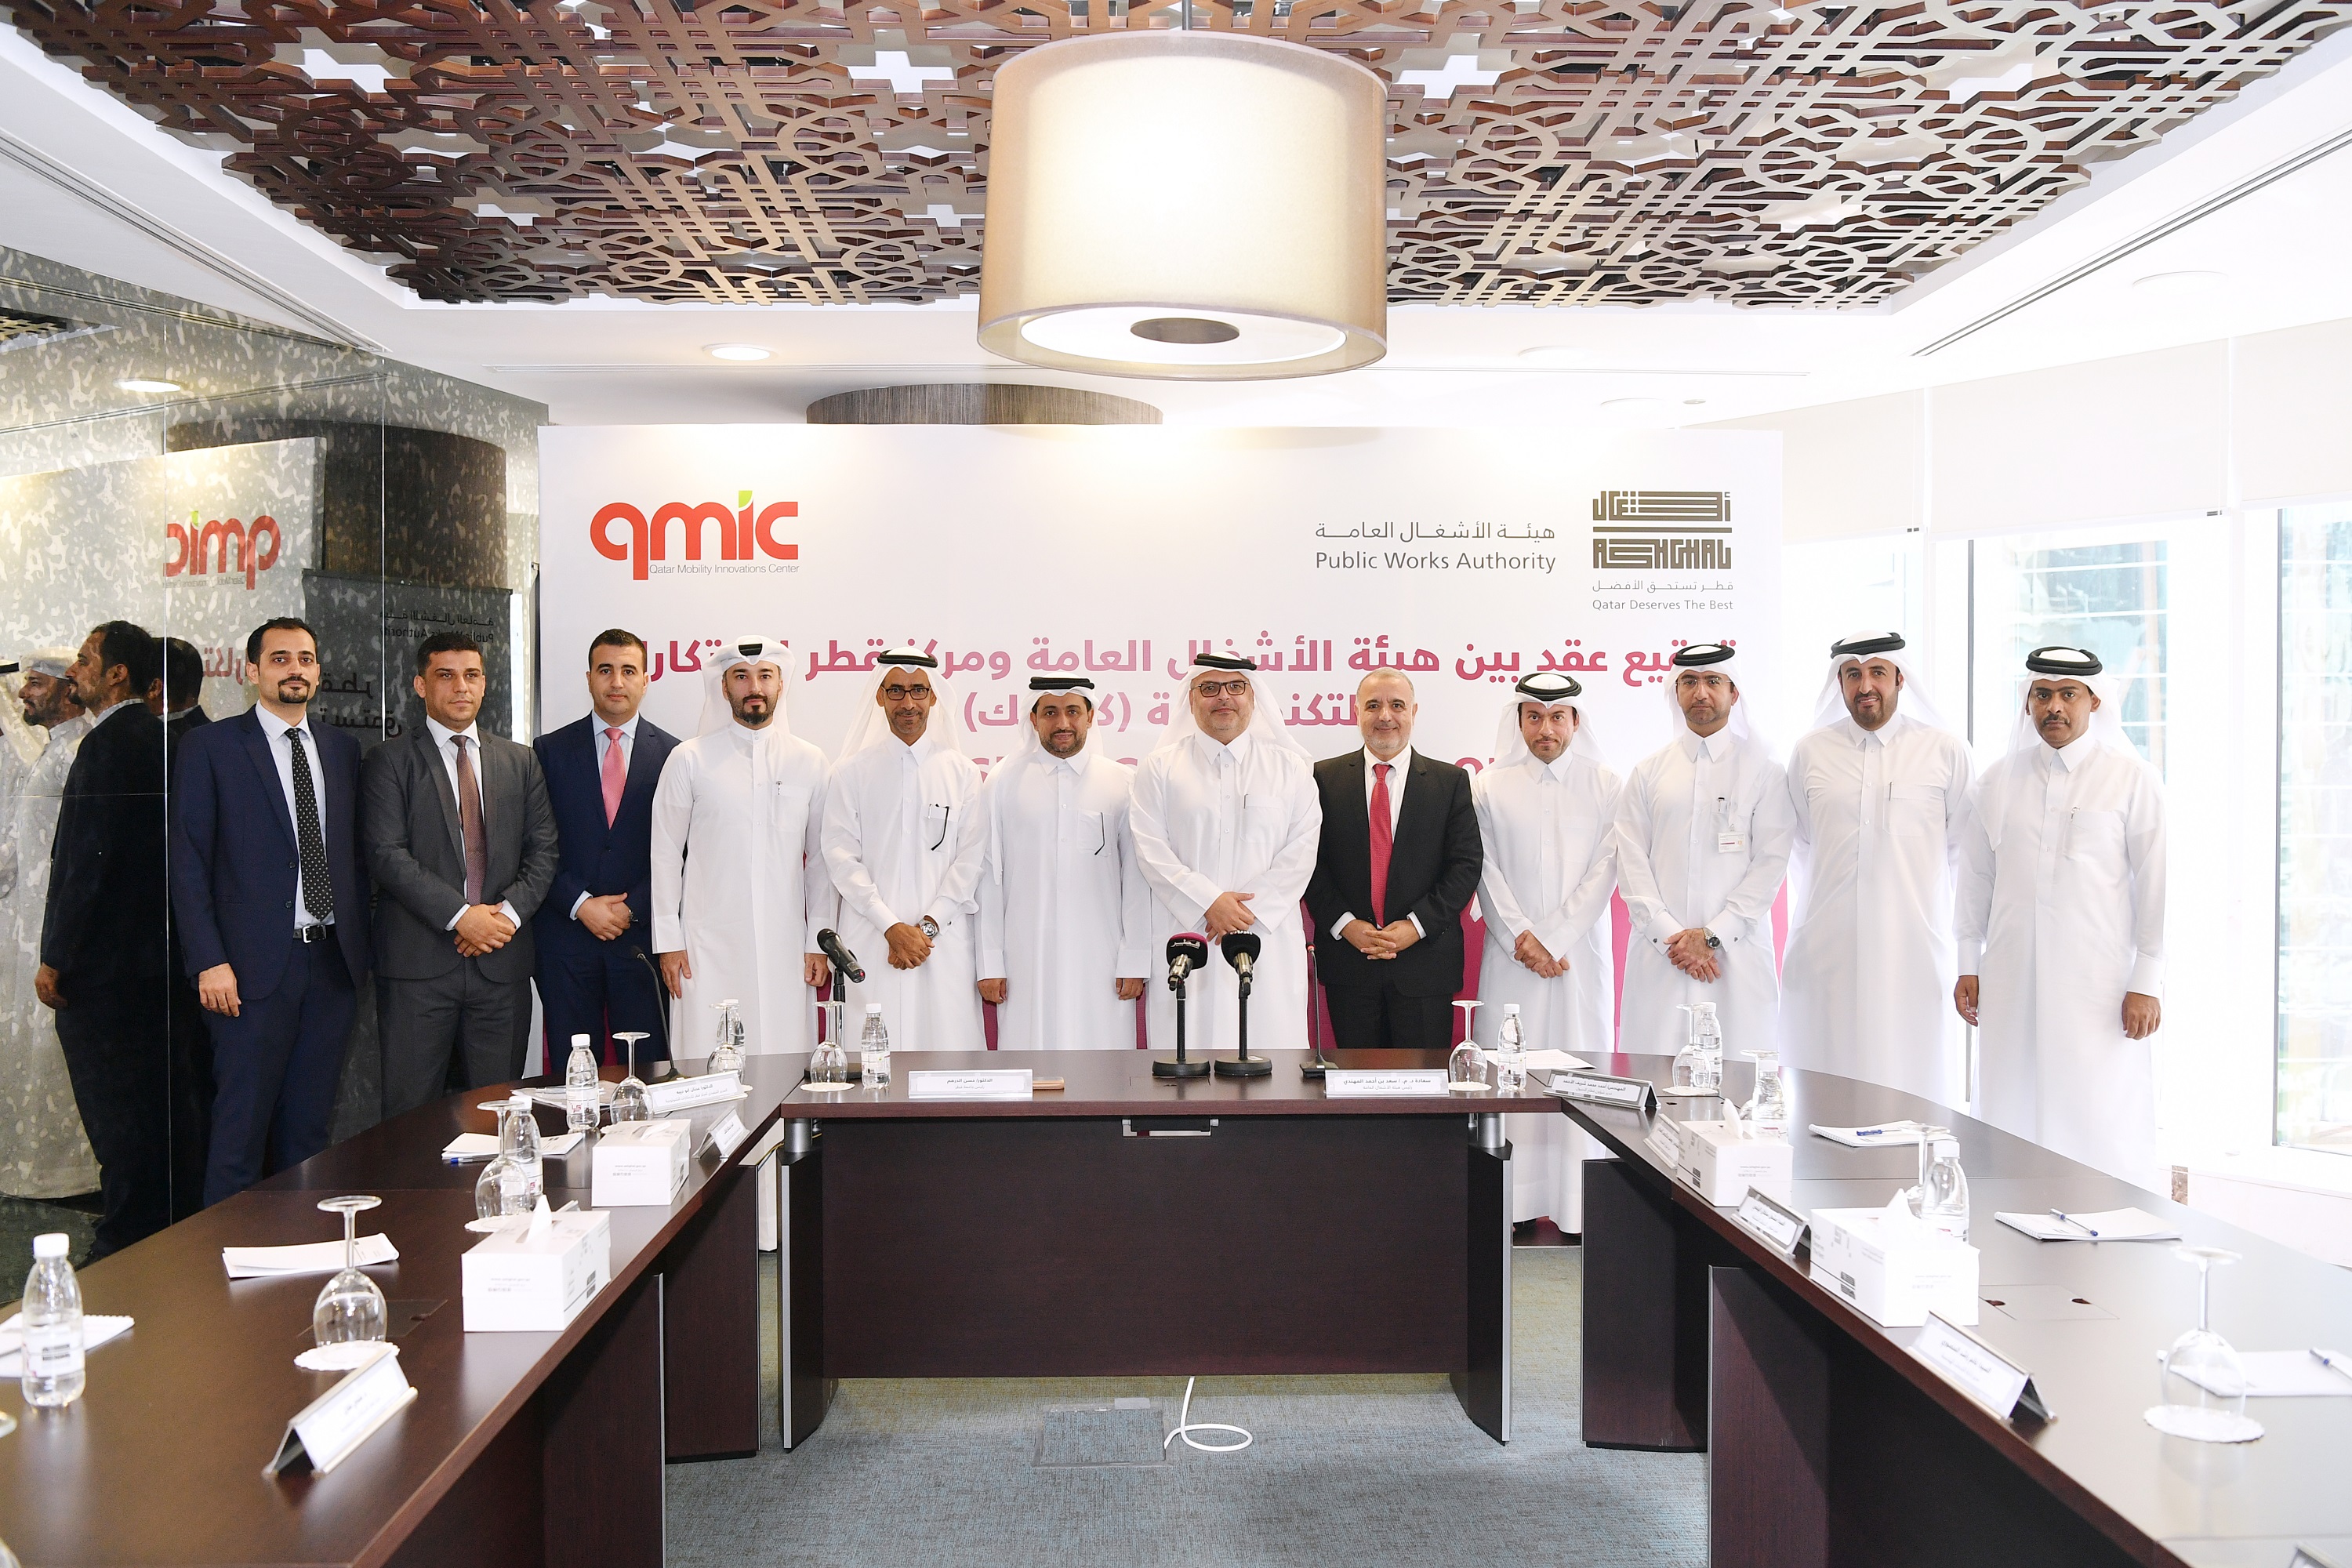 QMIC & Ashghal Sign a Strategic Partnership Agreement to Realize Smart Mobility Innovations